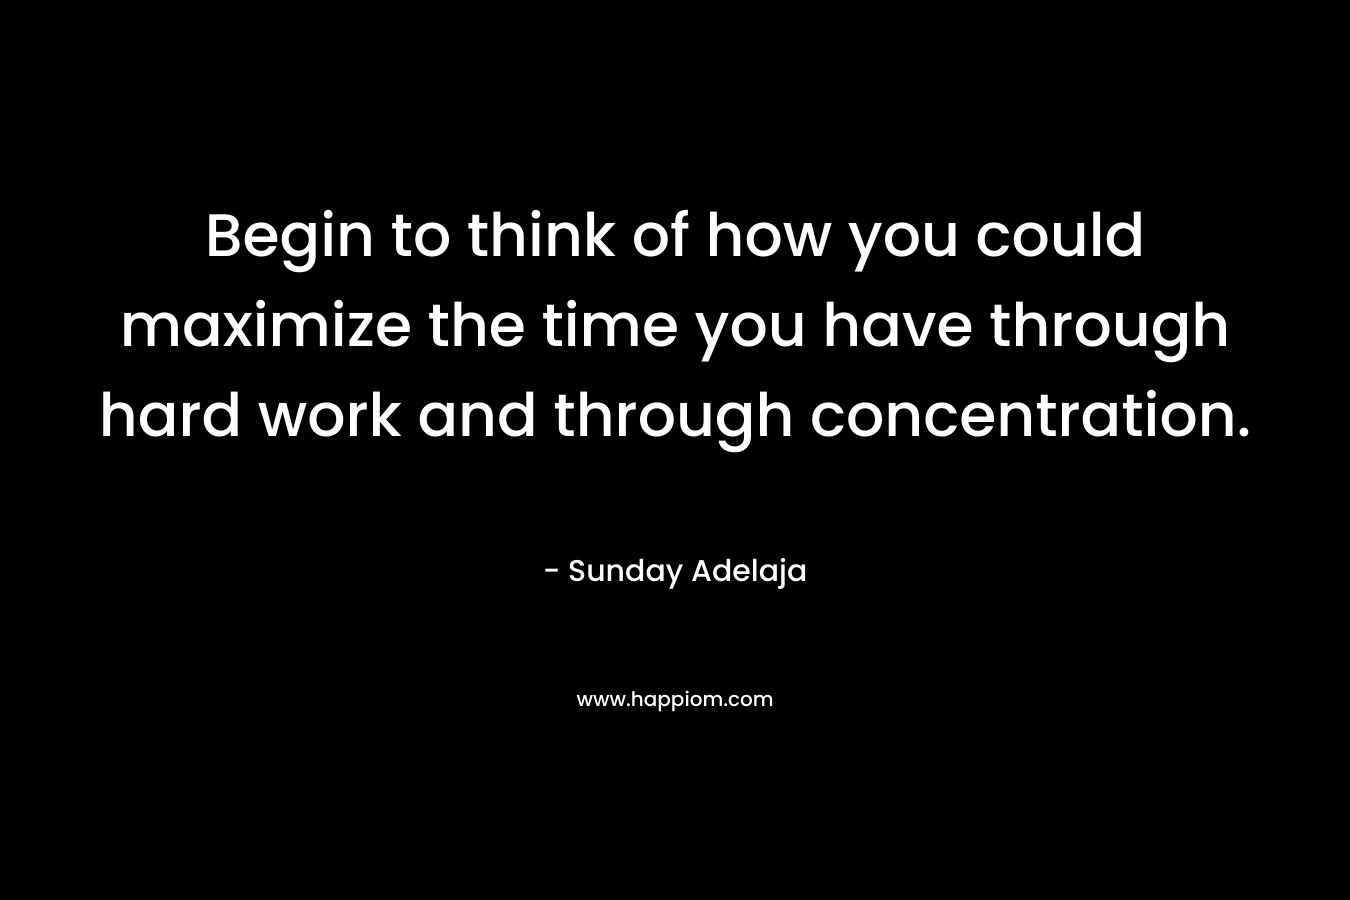 Begin to think of how you could maximize the time you have through hard work and through concentration.